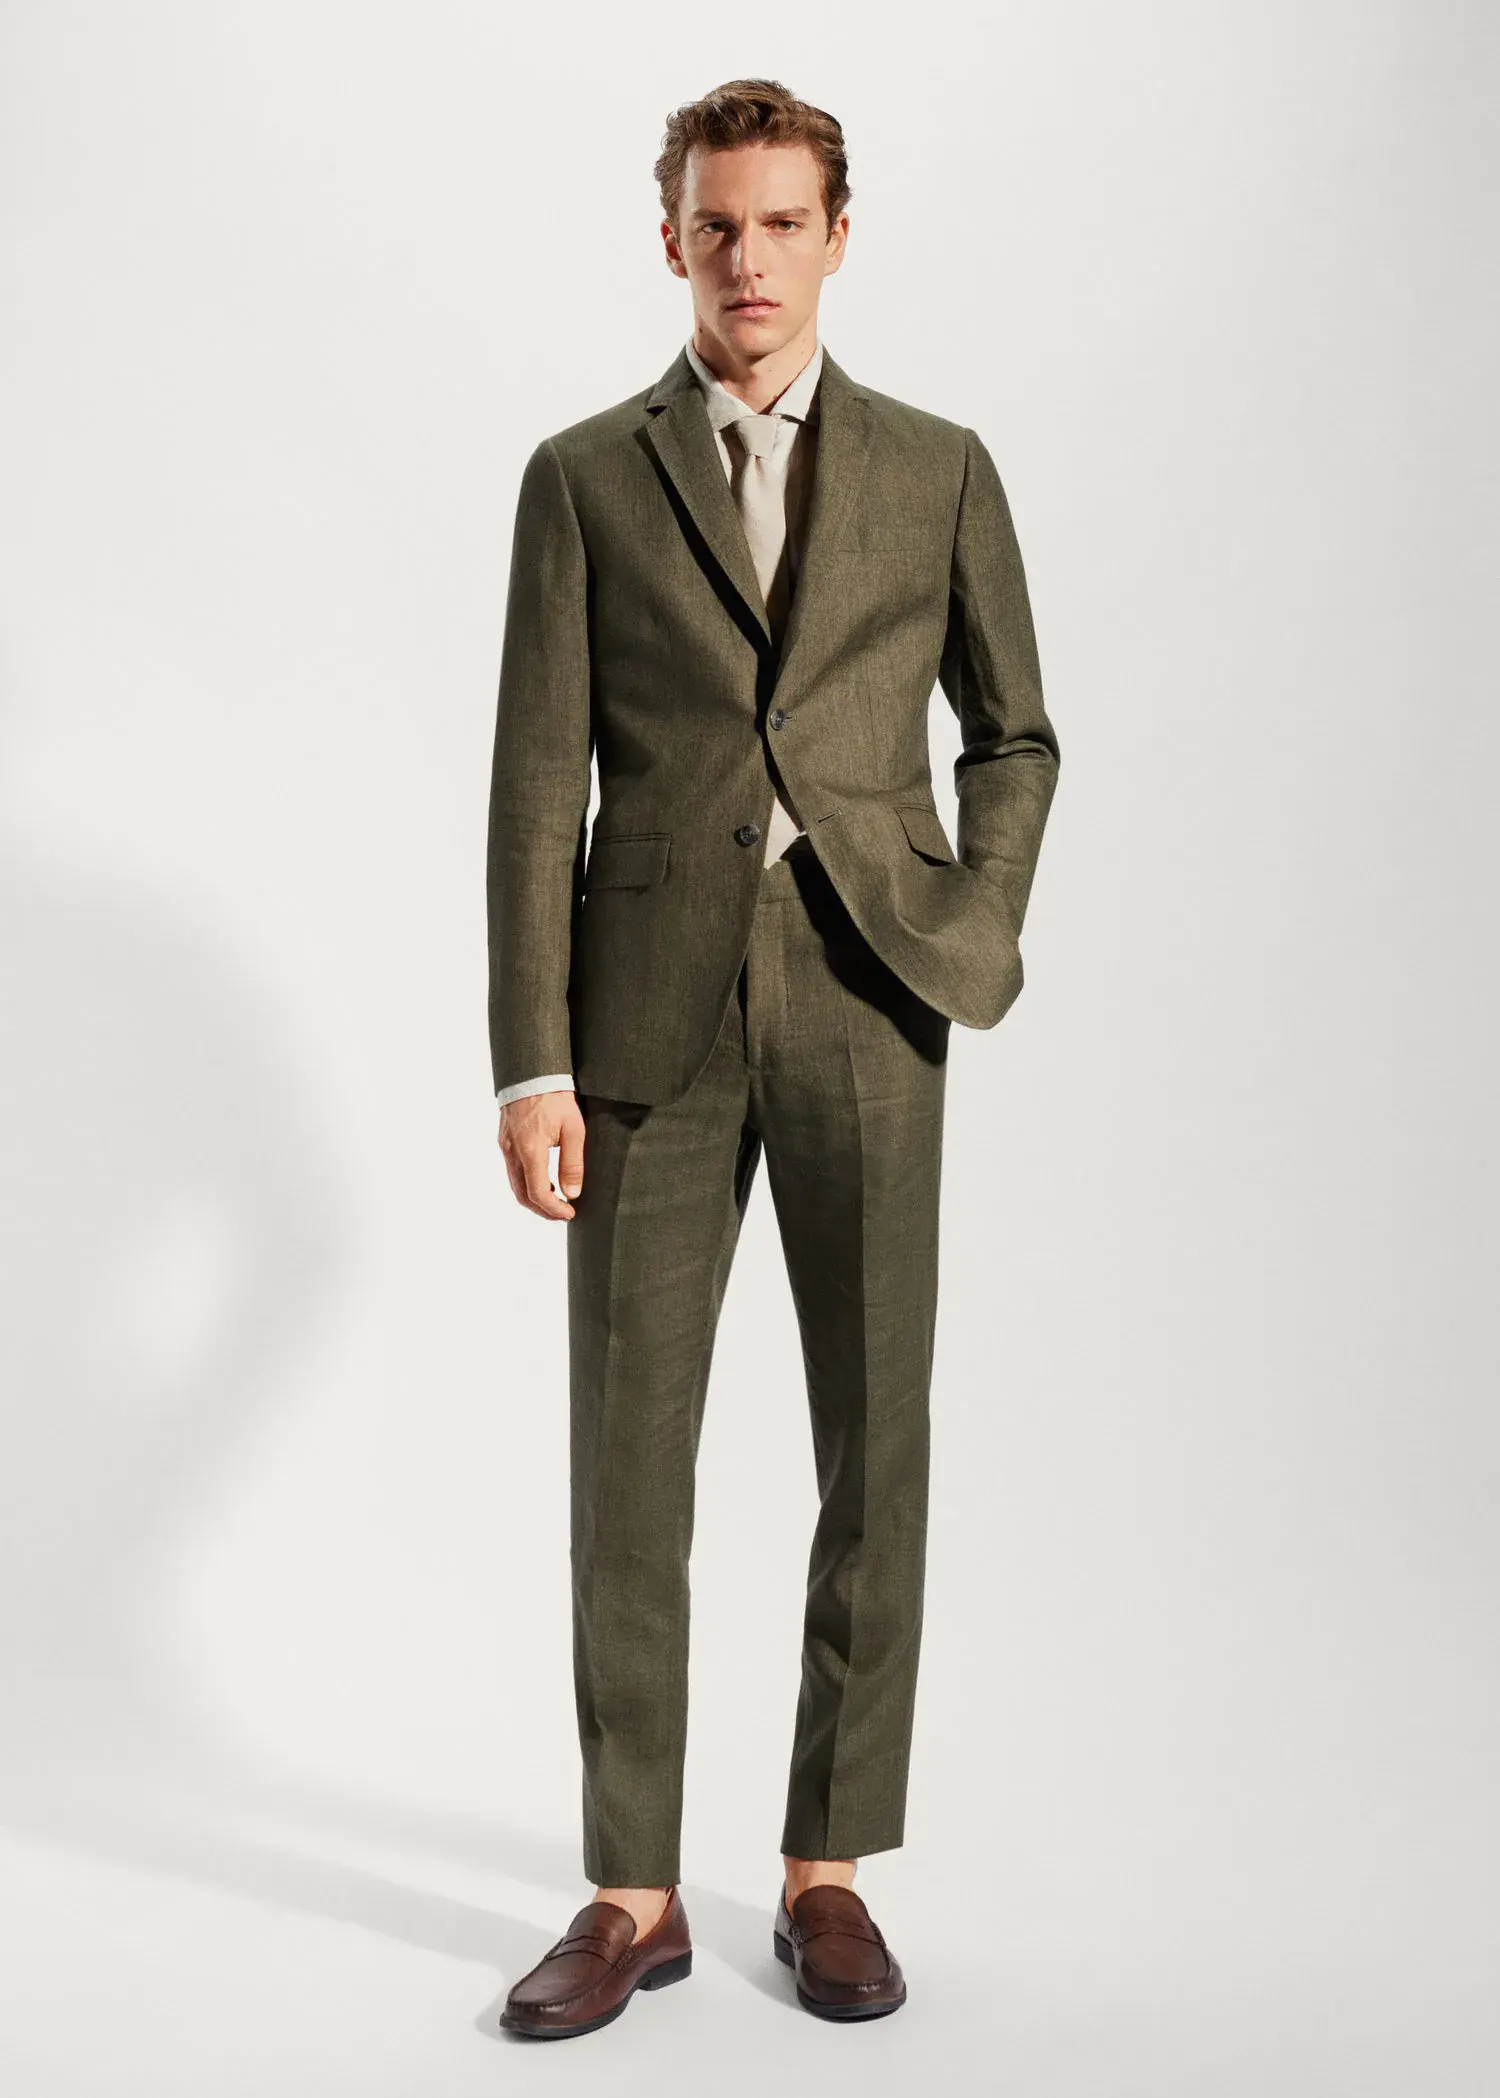 Mango Blazer suit 100% linen. a man wearing a suit and tie standing next to a wall. 